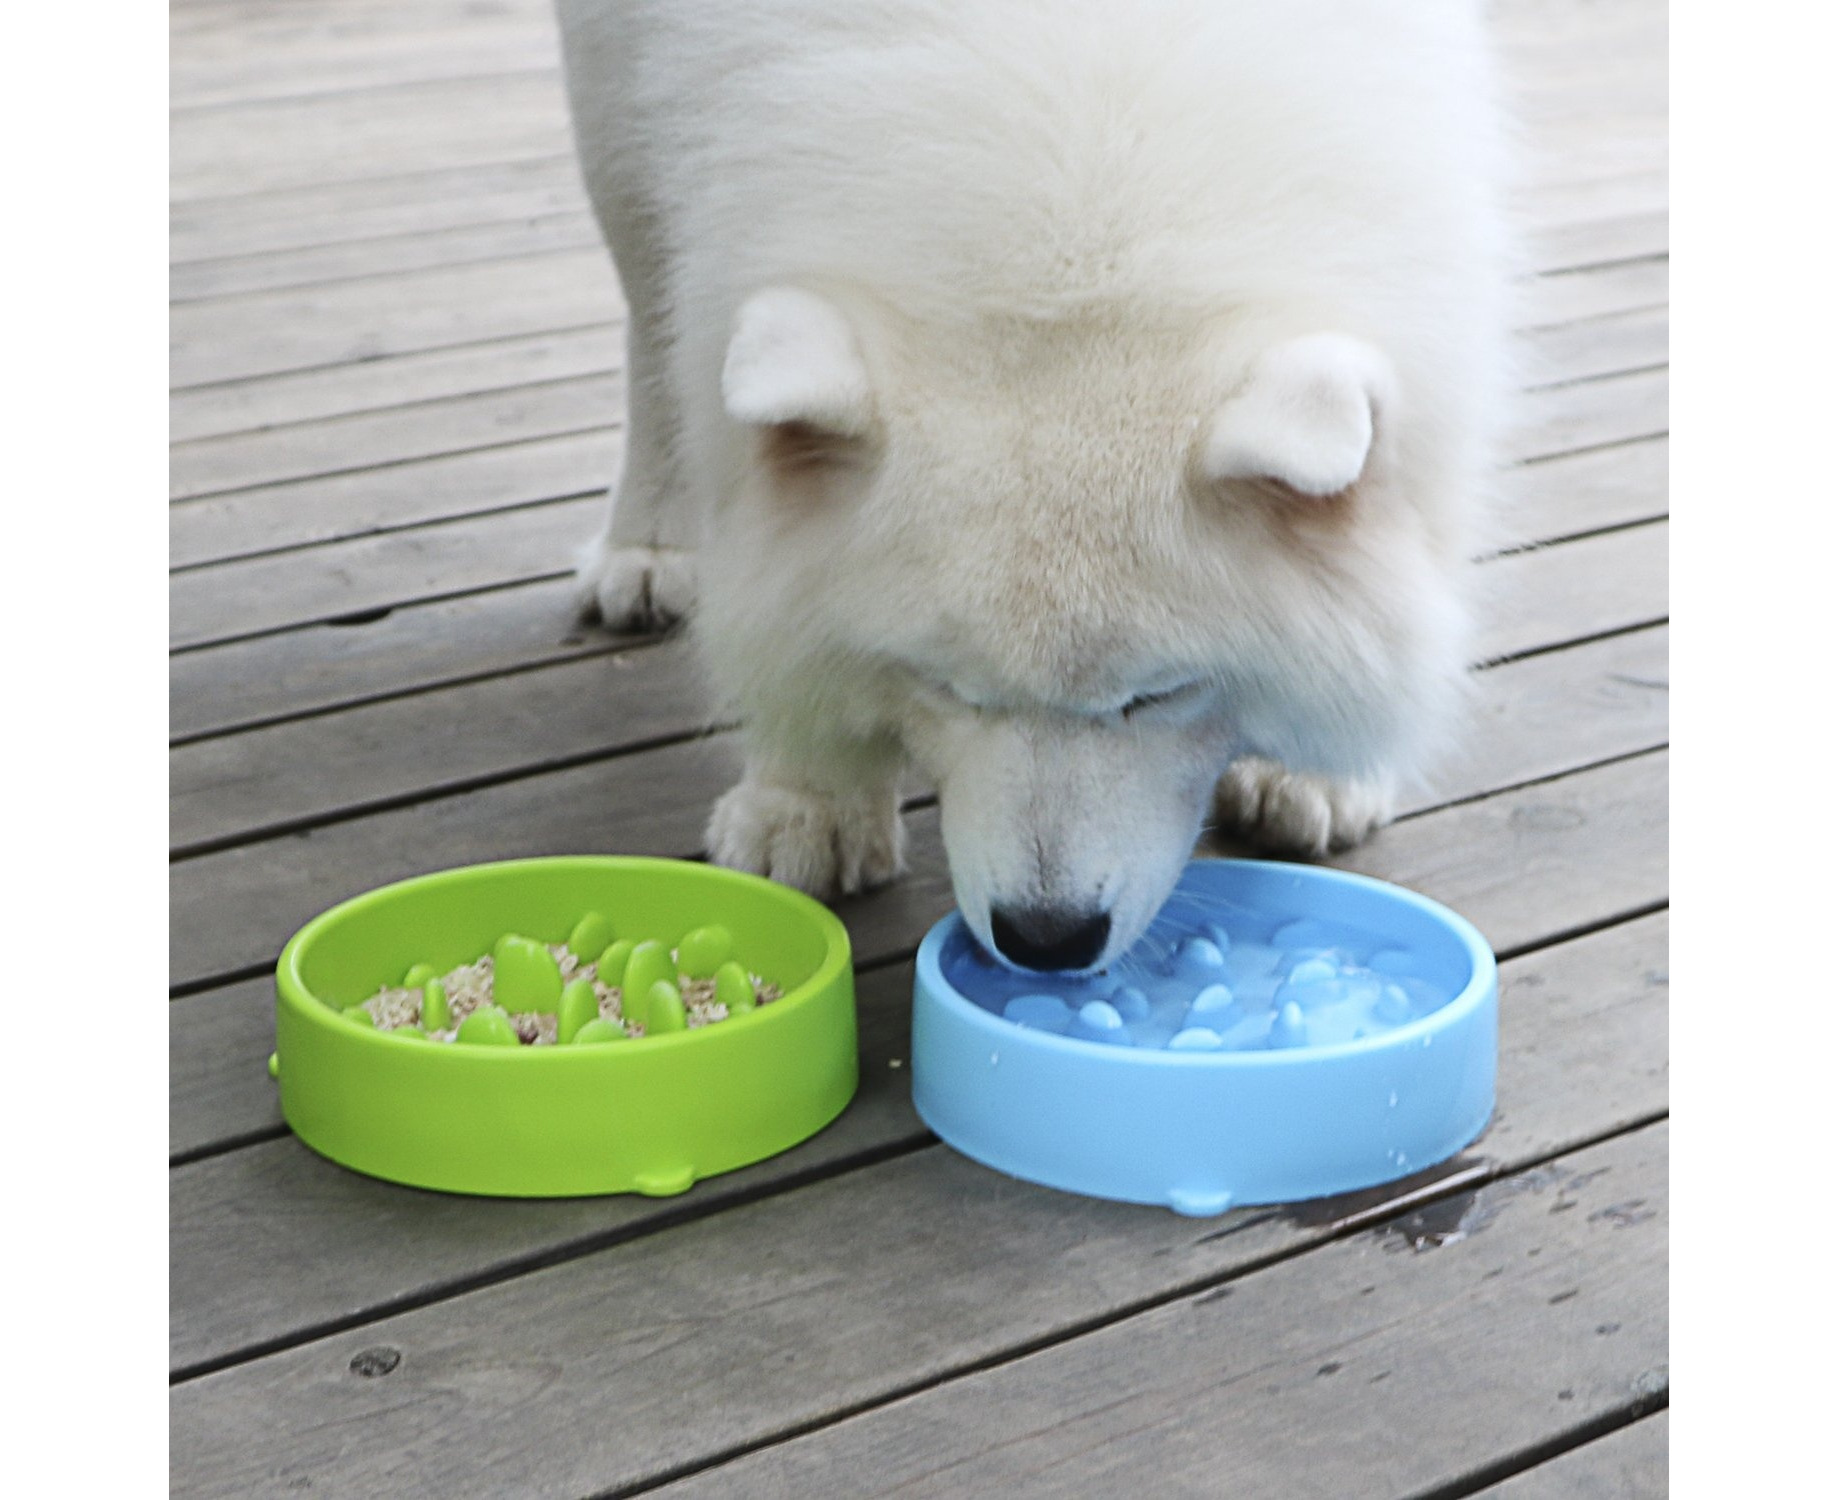 JASGOOD Dog Feeder Slow Eating Eco-Friendly Durable Non-Toxic Preventing  Choking Healthy Design Bowl for Pet Stop Bloat